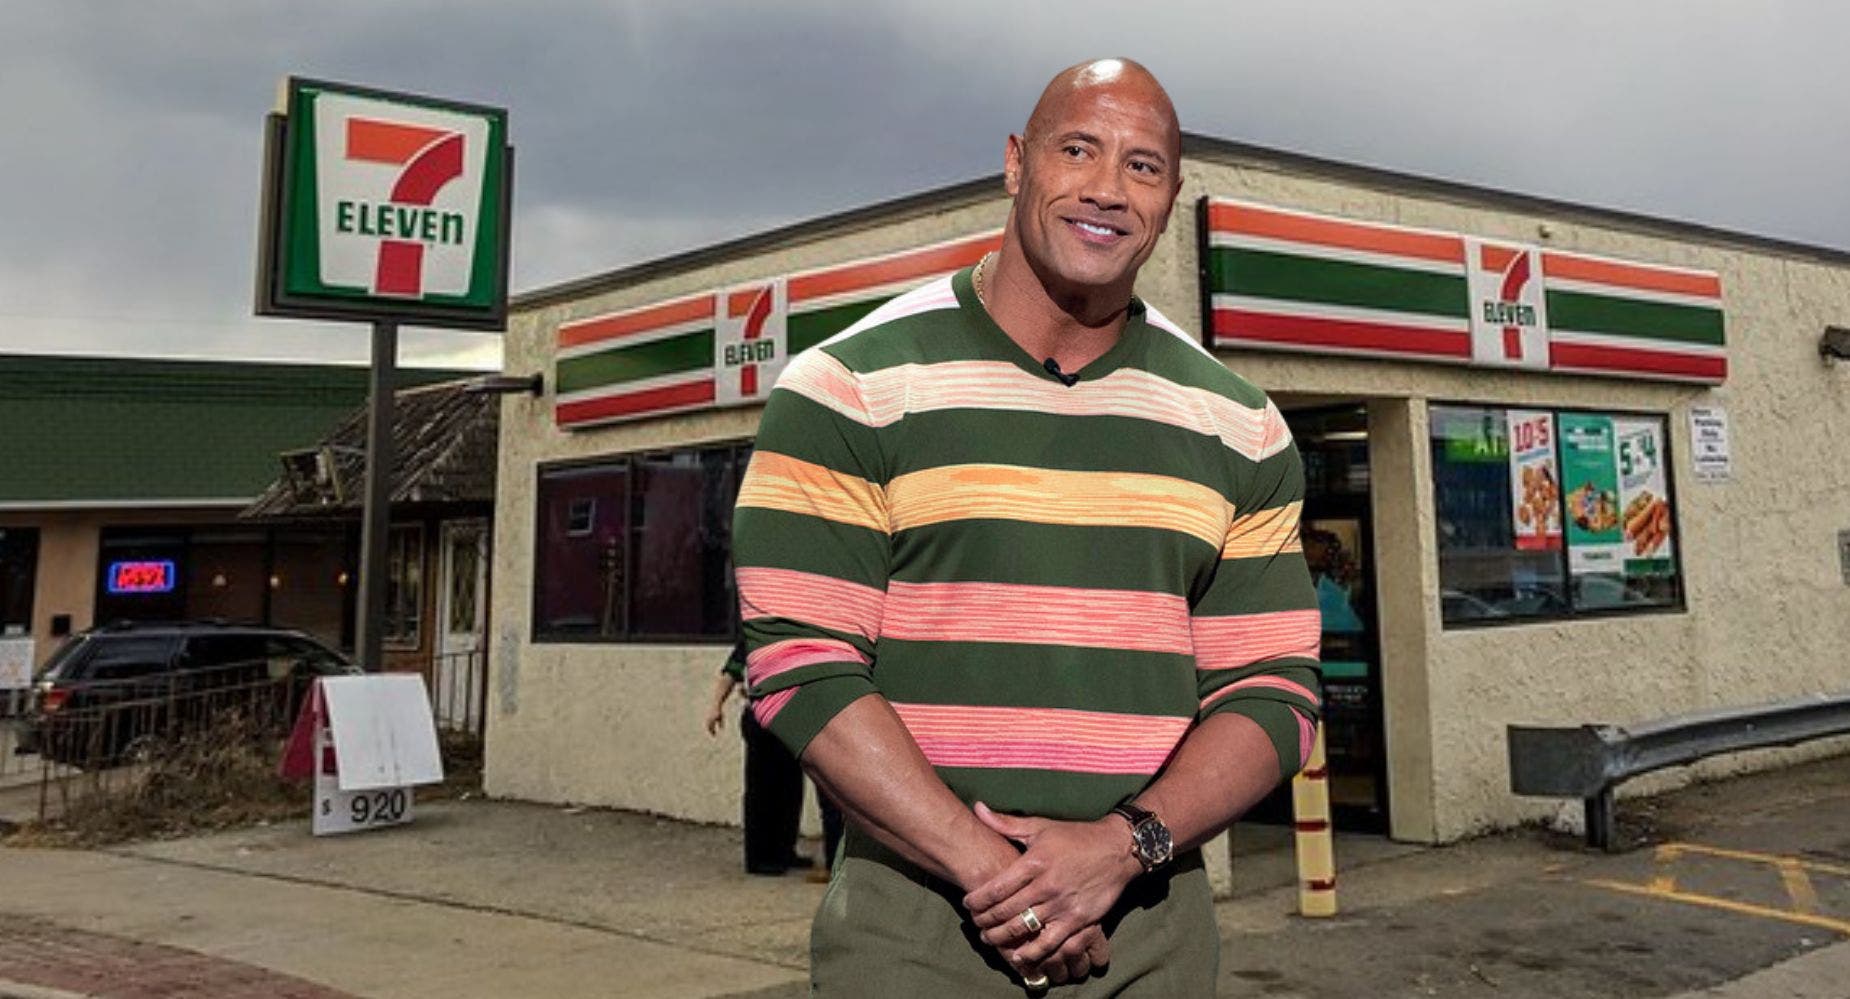 'You're Not You When You're Hungry': Why The Rock Bought All The Snickers At This 7-Eleven